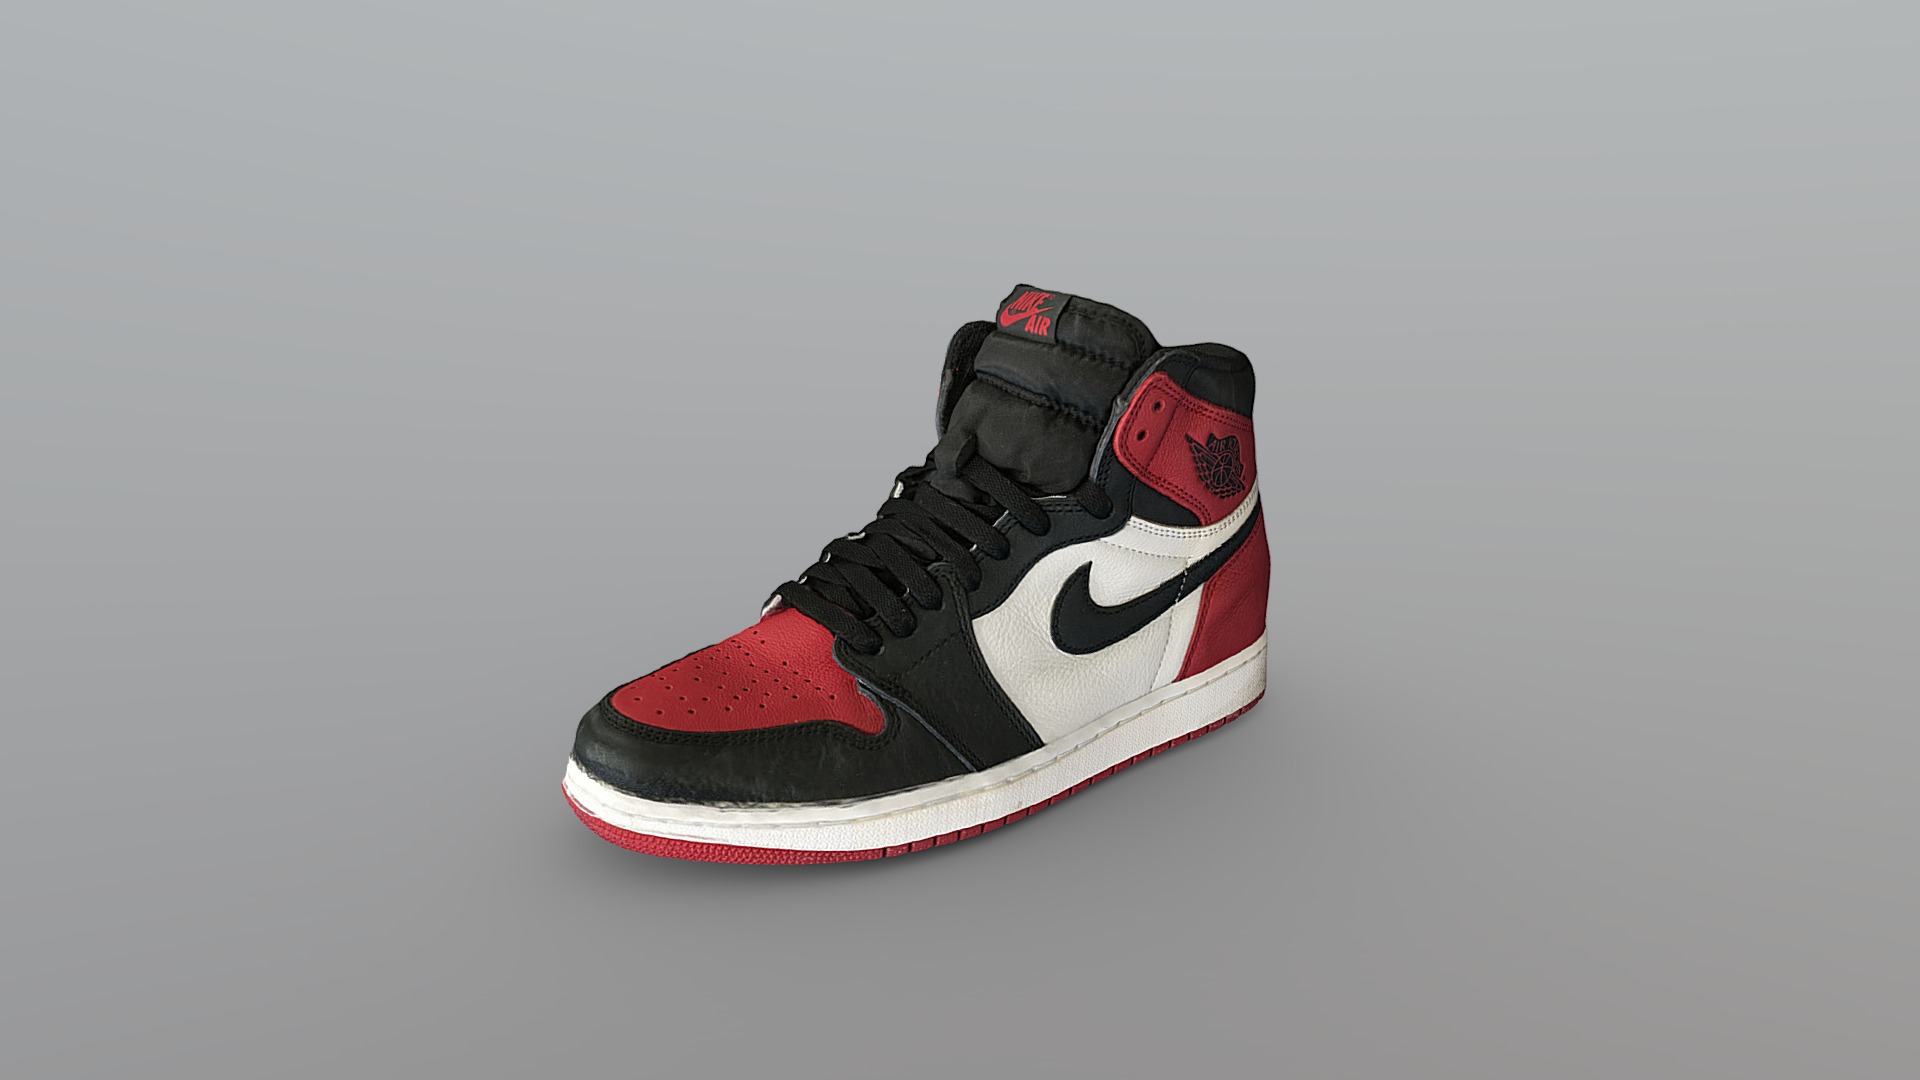 3D model Nike Air Jordan 1 Sneaker (Bred) - This is a 3D model of the Nike Air Jordan 1 Sneaker (Bred). The 3D model is about a black and red shoe.